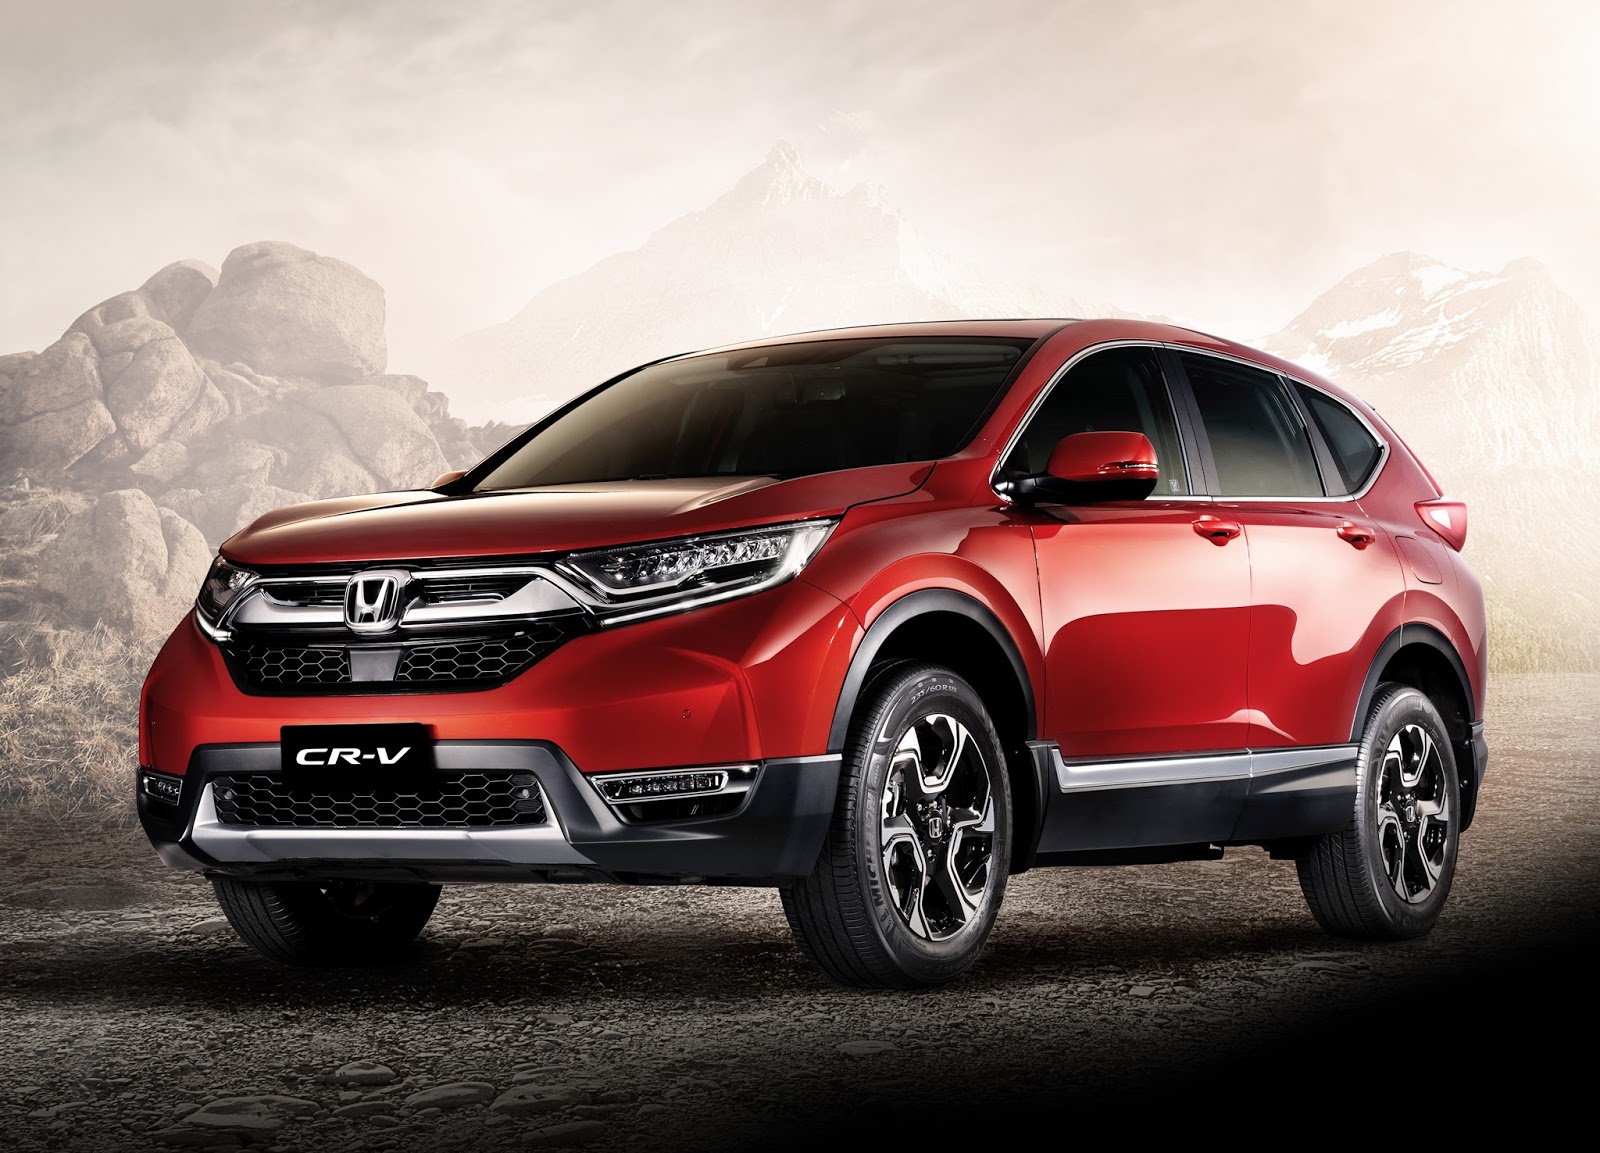 Honda Launches the All-New 7-Seater Honda CR-V 1.6L Diesel Turbo 9AT